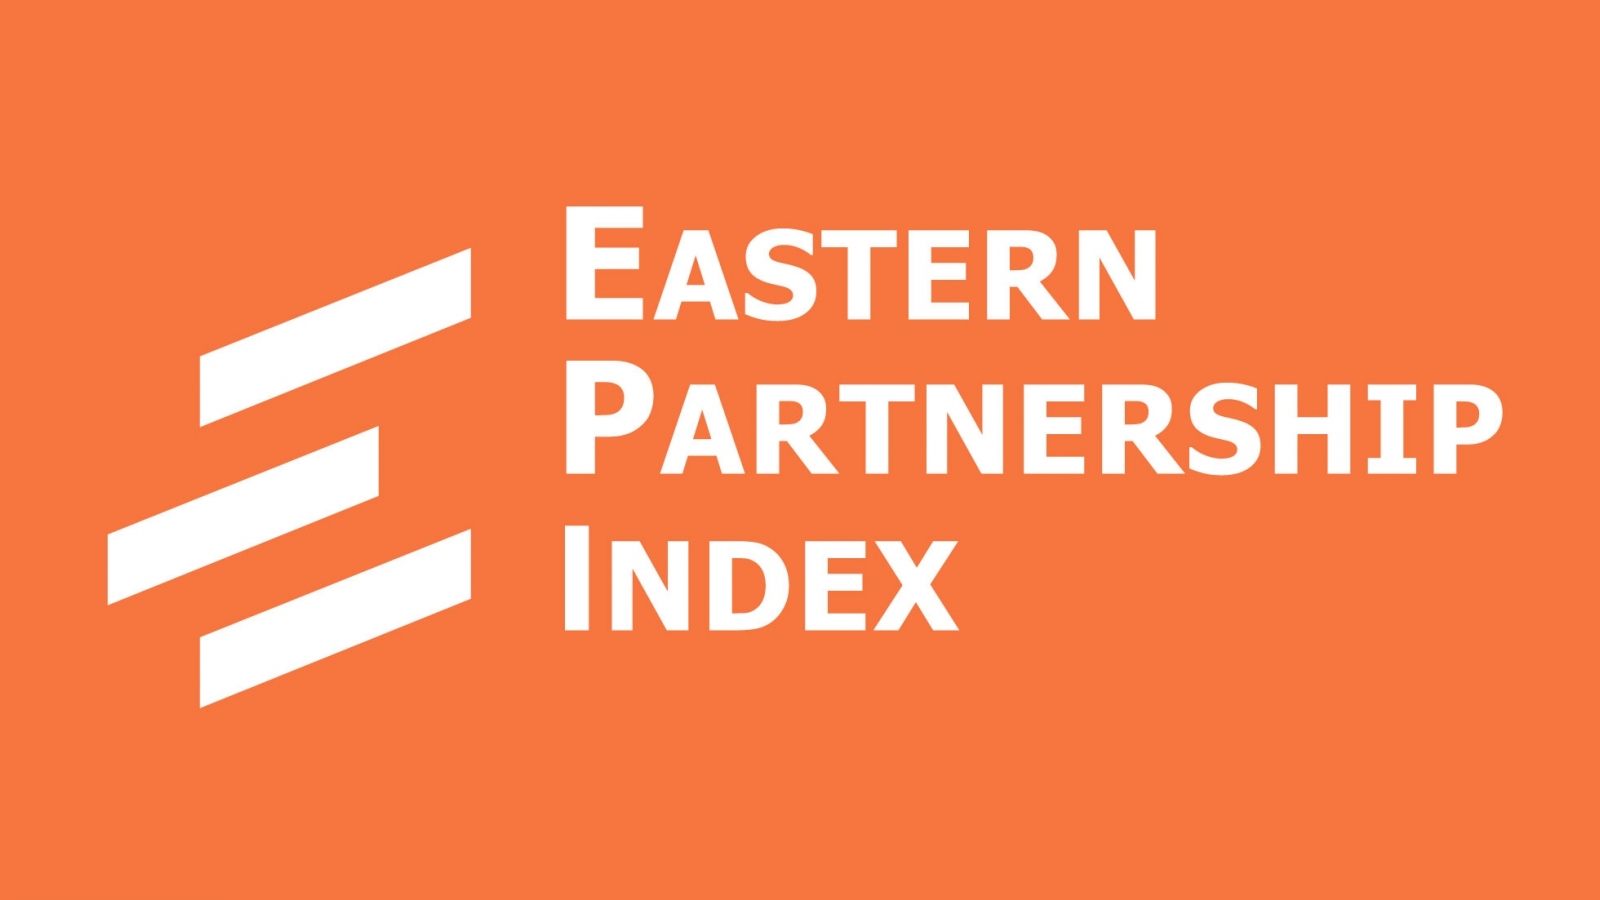 Event in Brussels to present Eastern Partnership Index 2015-2016